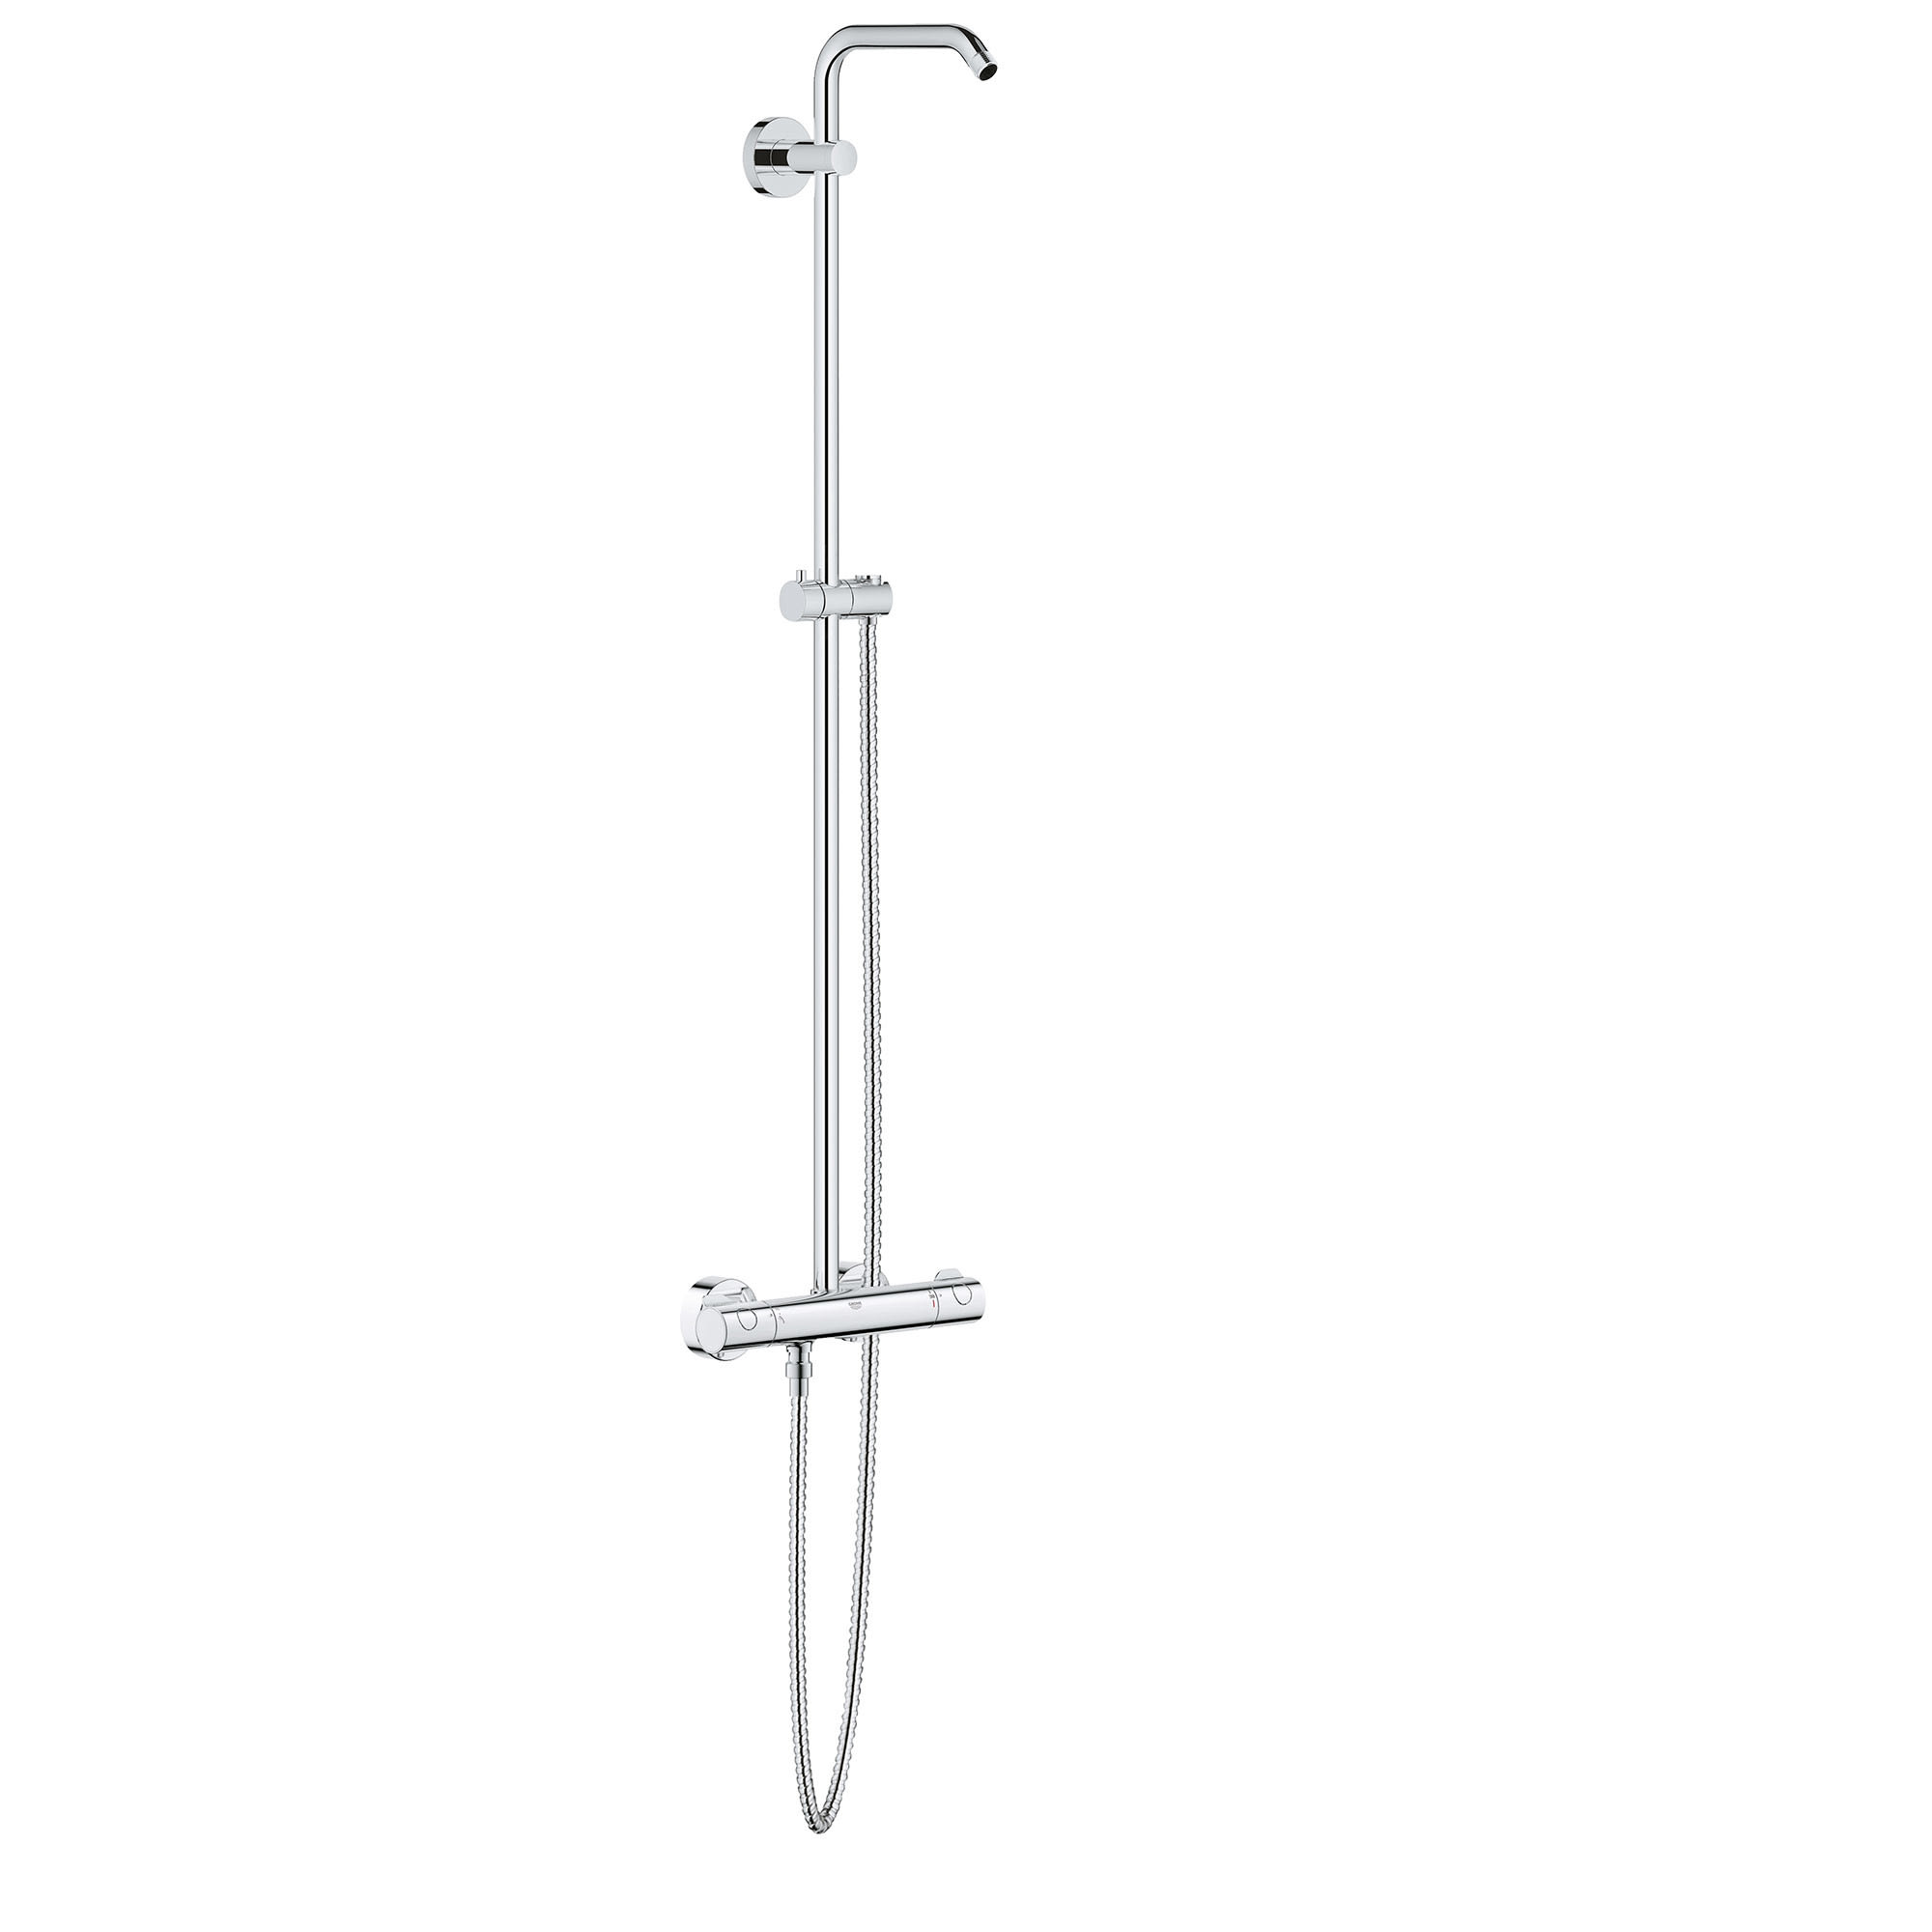 Grohe 26421000 Starlight New Tempesta Double Handle Thermostatic Shower System Shower Arm- Less Shower Head and Handshower - Faucet.com